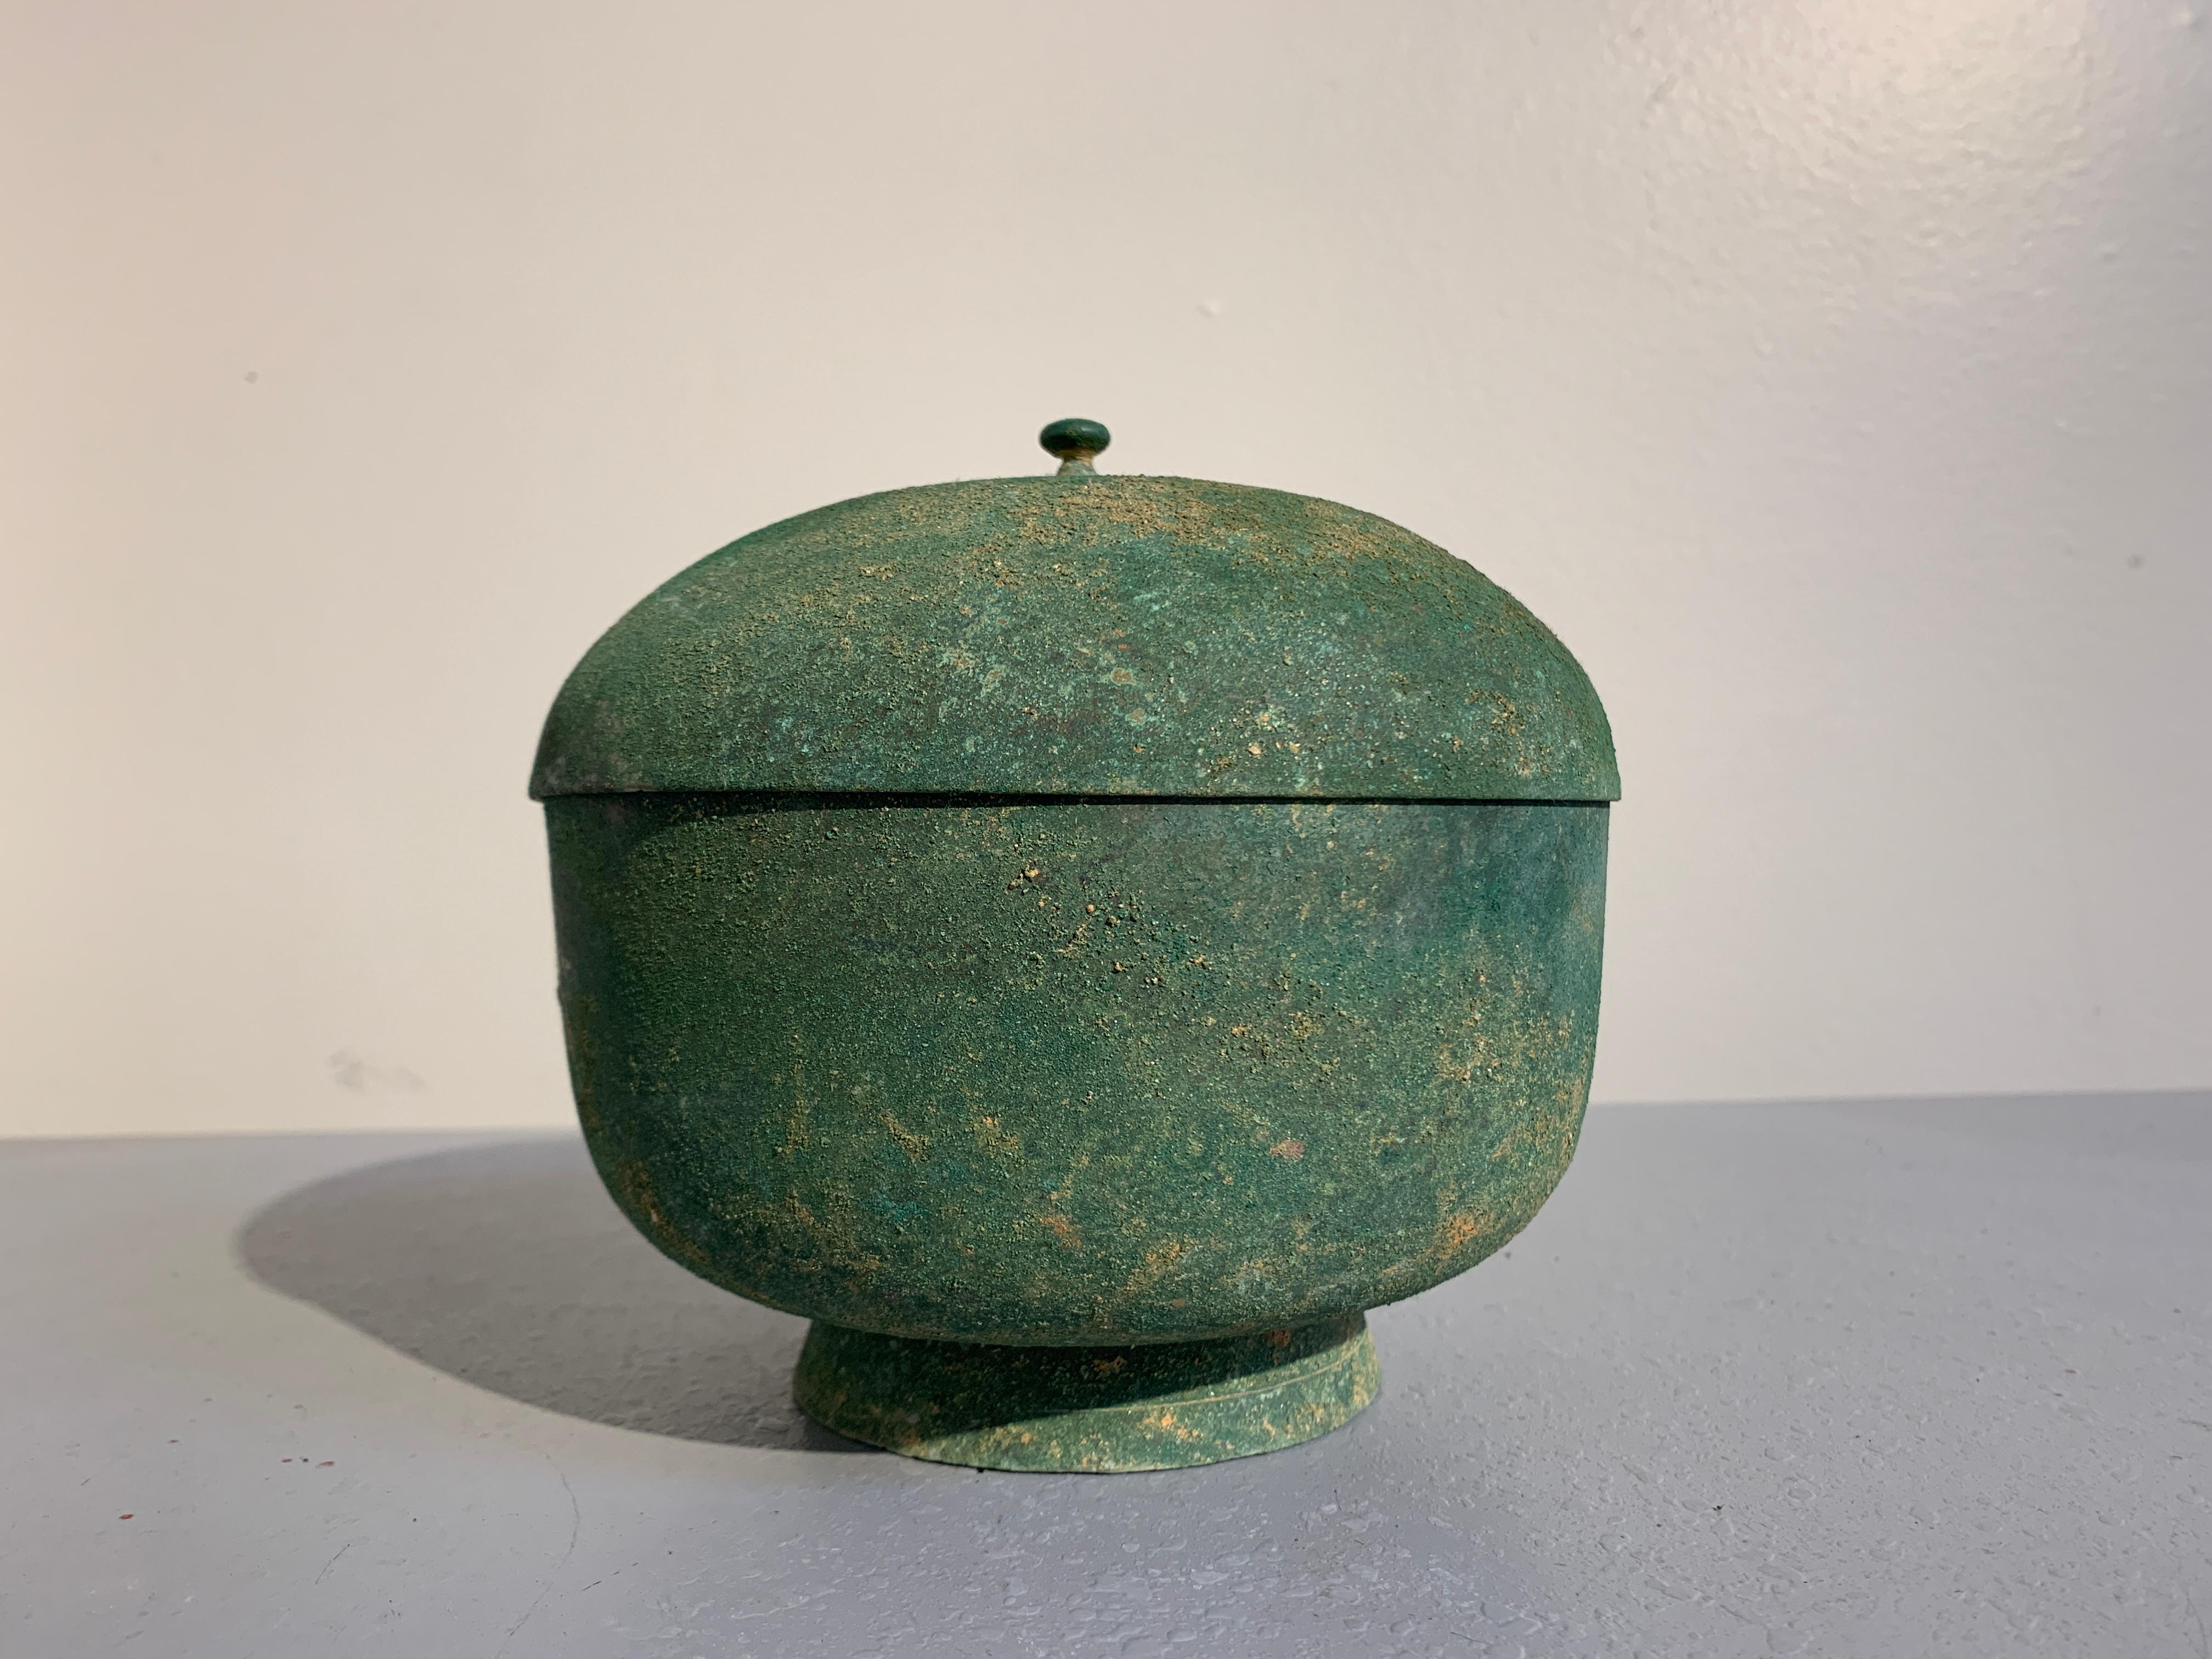 A fine Korean spun bronze bowl and cover with nice malachite green patina, Goryeo Dynasty, 13th century.

The simple bowl of nearly globular form, with a short, slightly splayed foot, wide body, and domed lid topped with a small knob finial. The